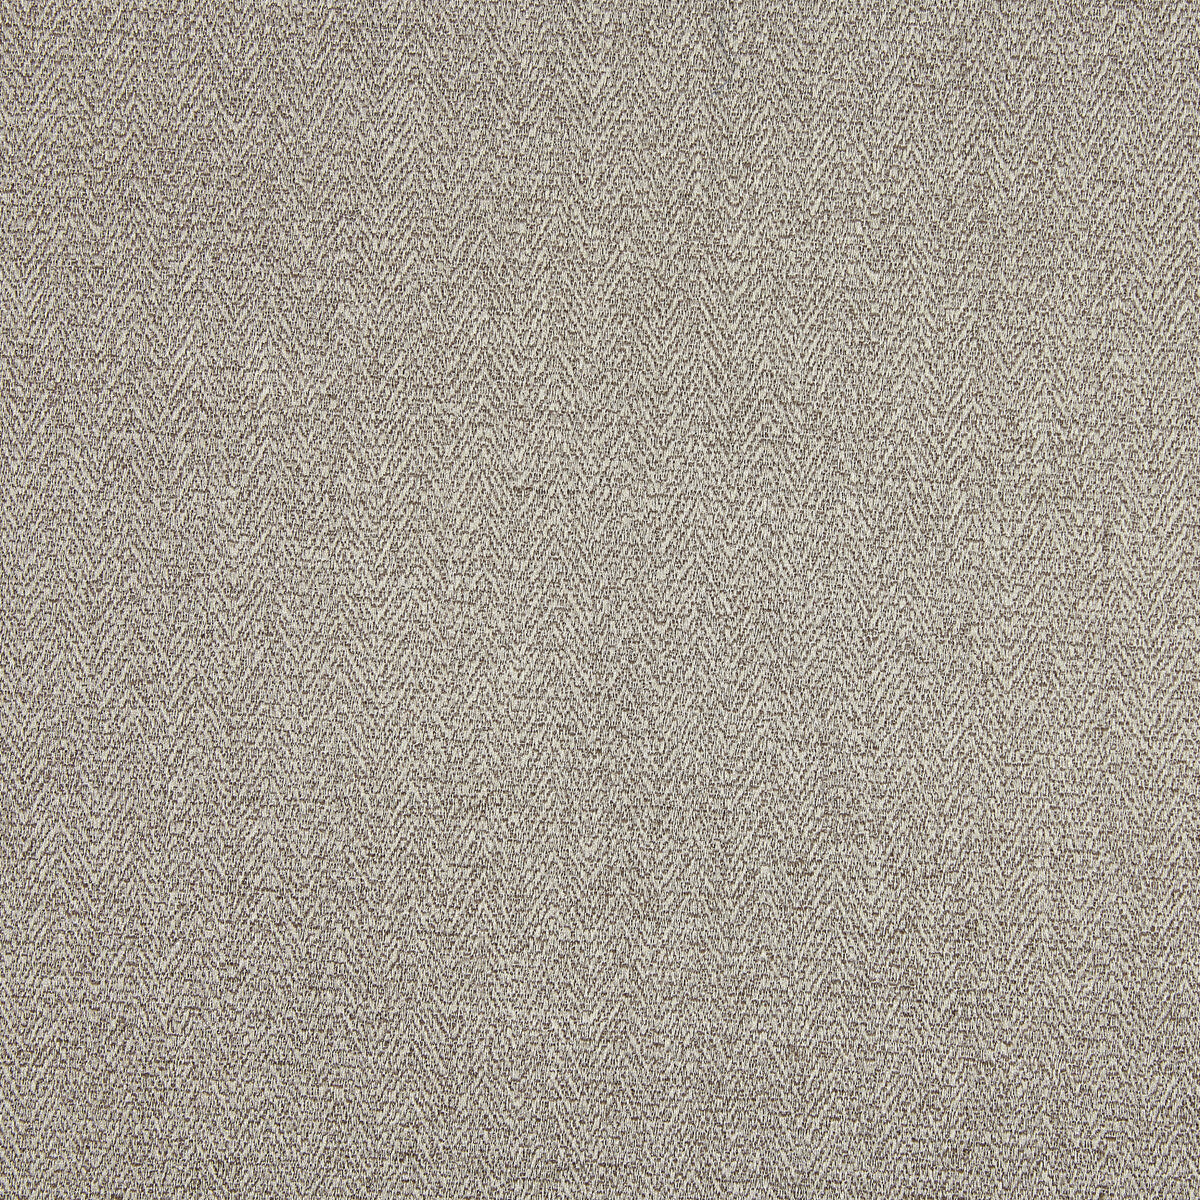 Brummell fabric in 6 color - pattern LZ-30363.06.0 - by Kravet Design in the Lizzo collection